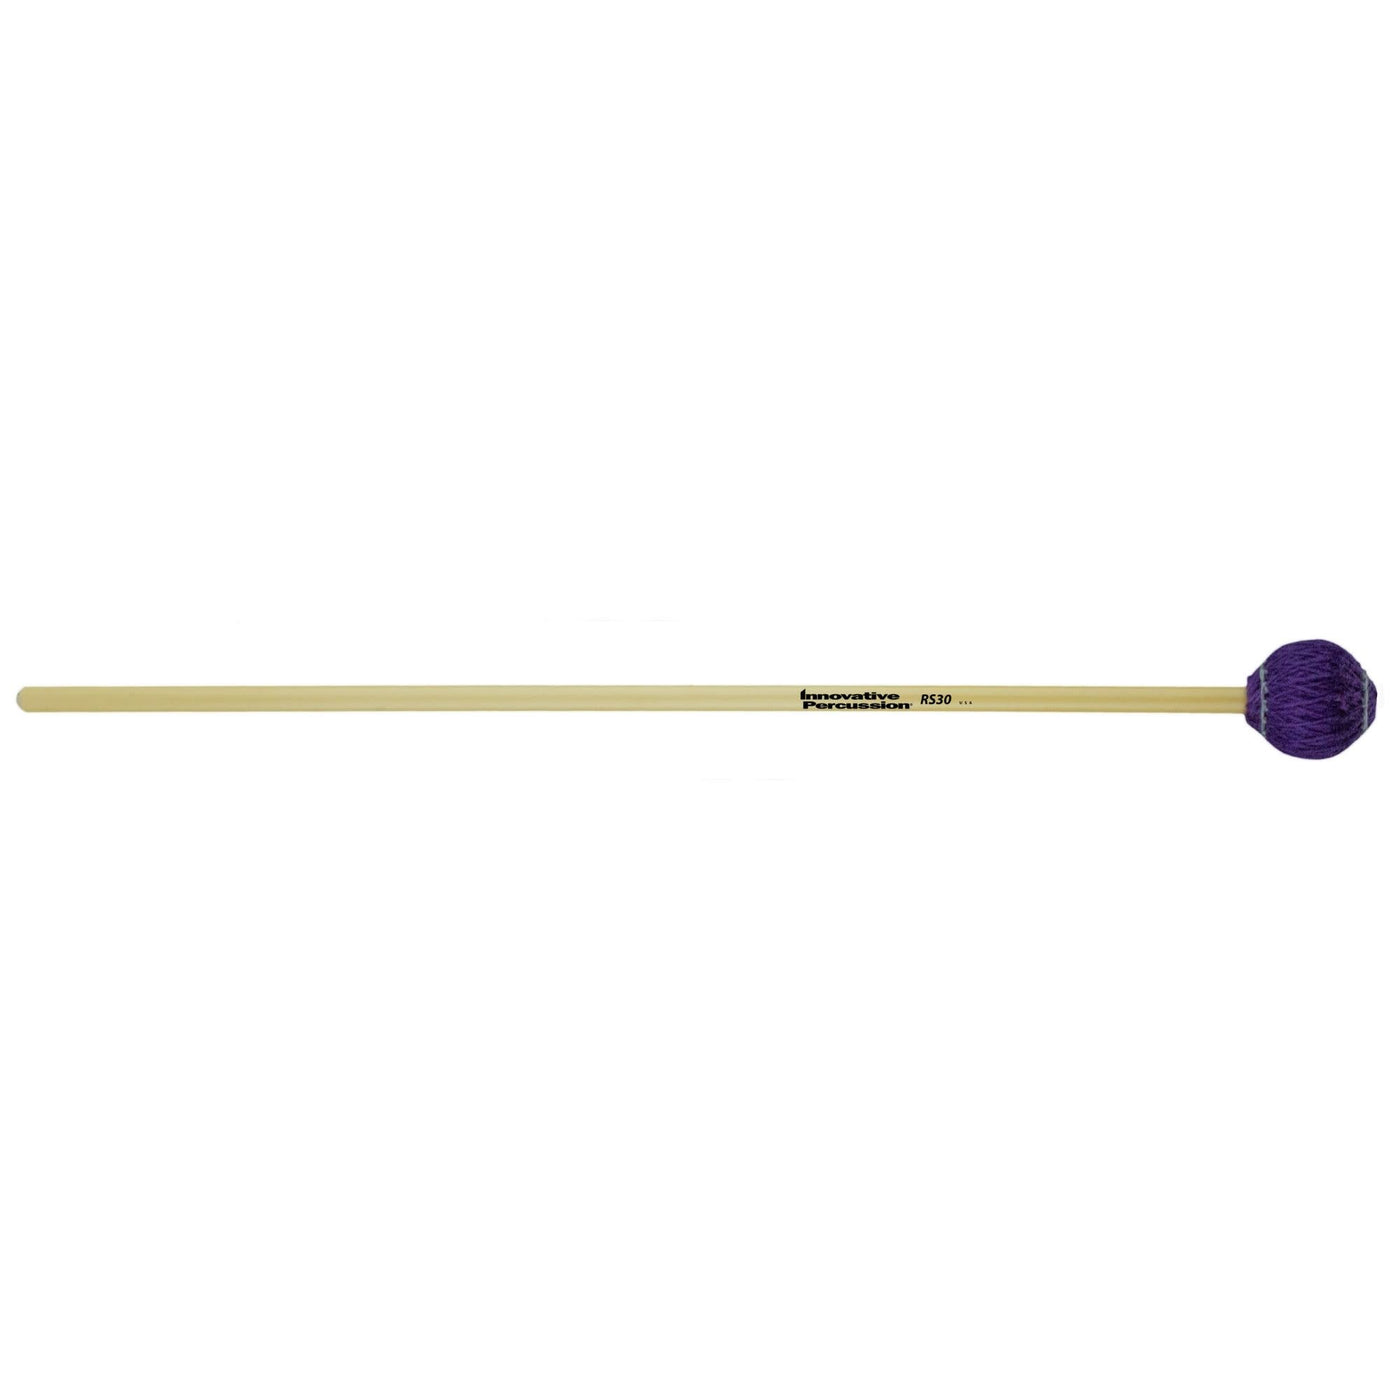 Innovative Percussion RS30 Keyboard Mallet